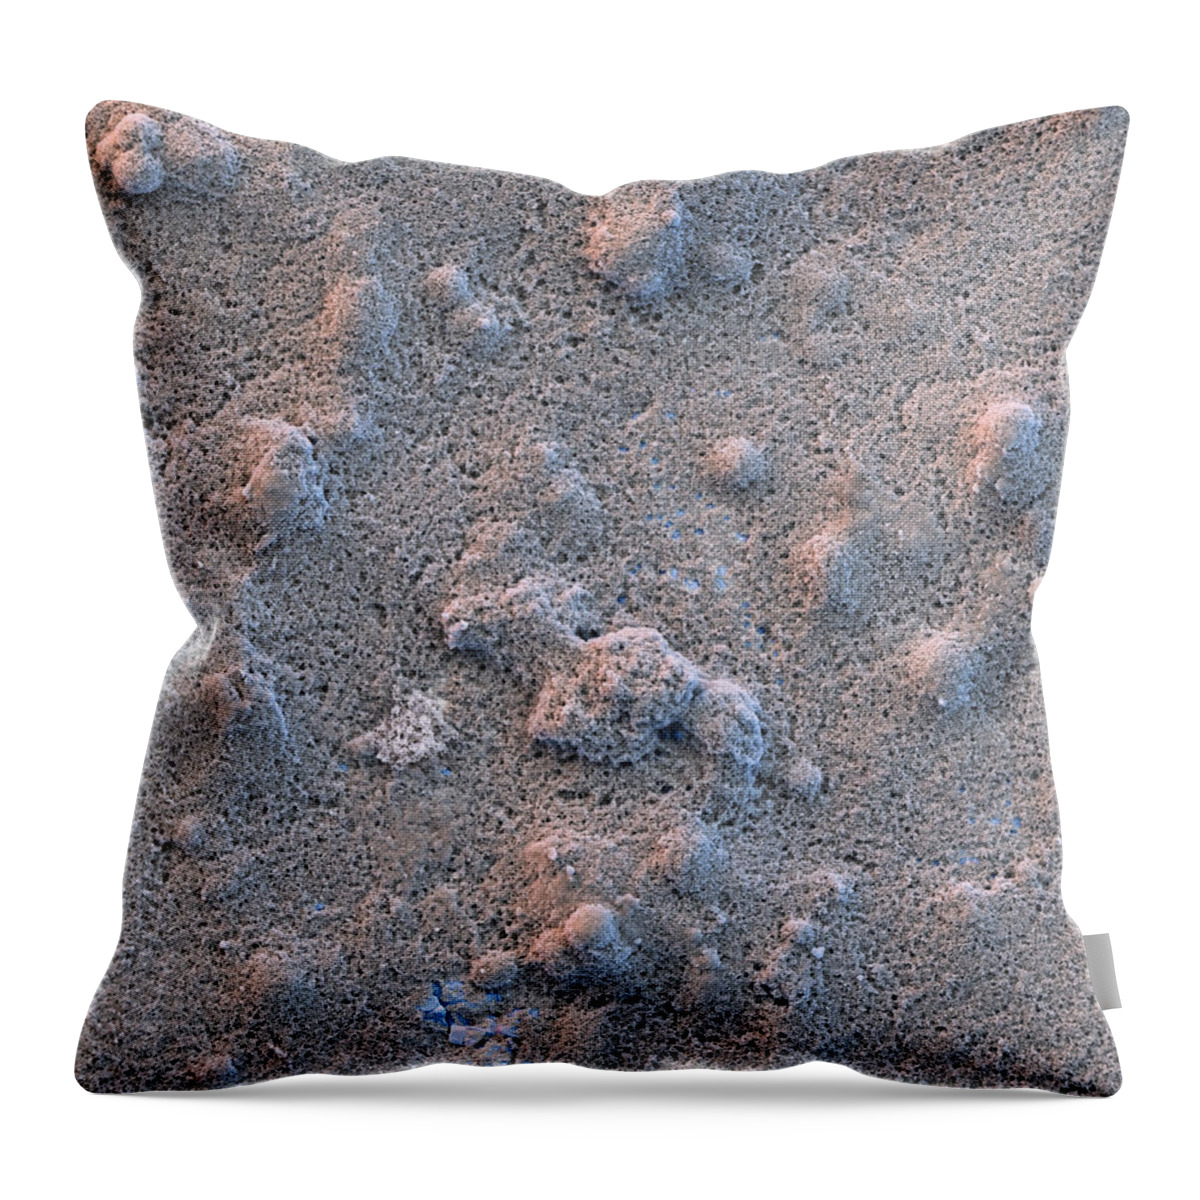 Coated Throw Pillow featuring the photograph Self-cleaning Paint Sem #6 by Meckes/ottawa